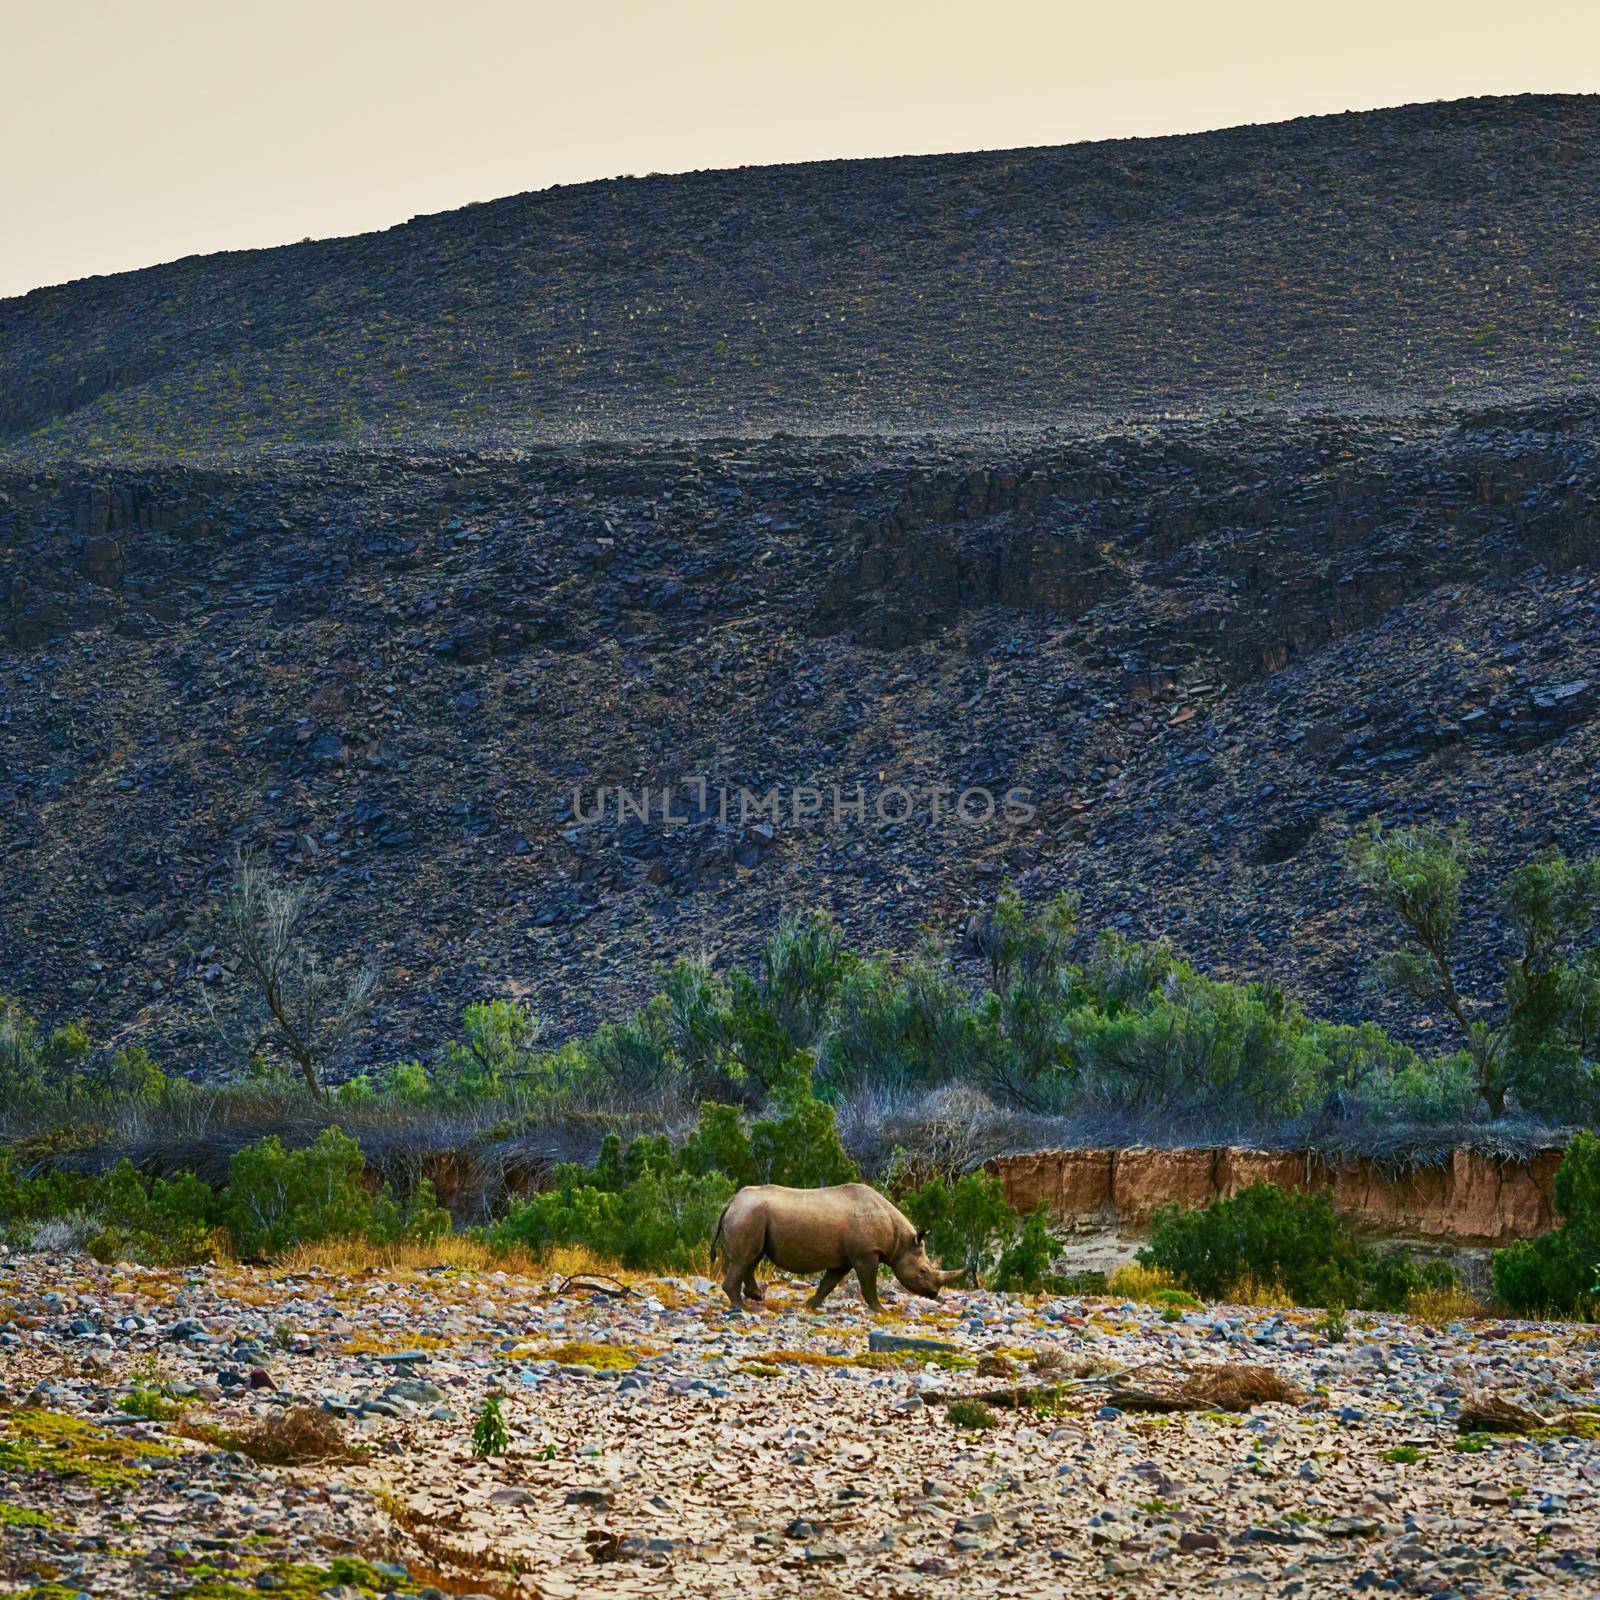 One of the last of its kind. Shot of a rhino in its natural habitat. by YuriArcurs